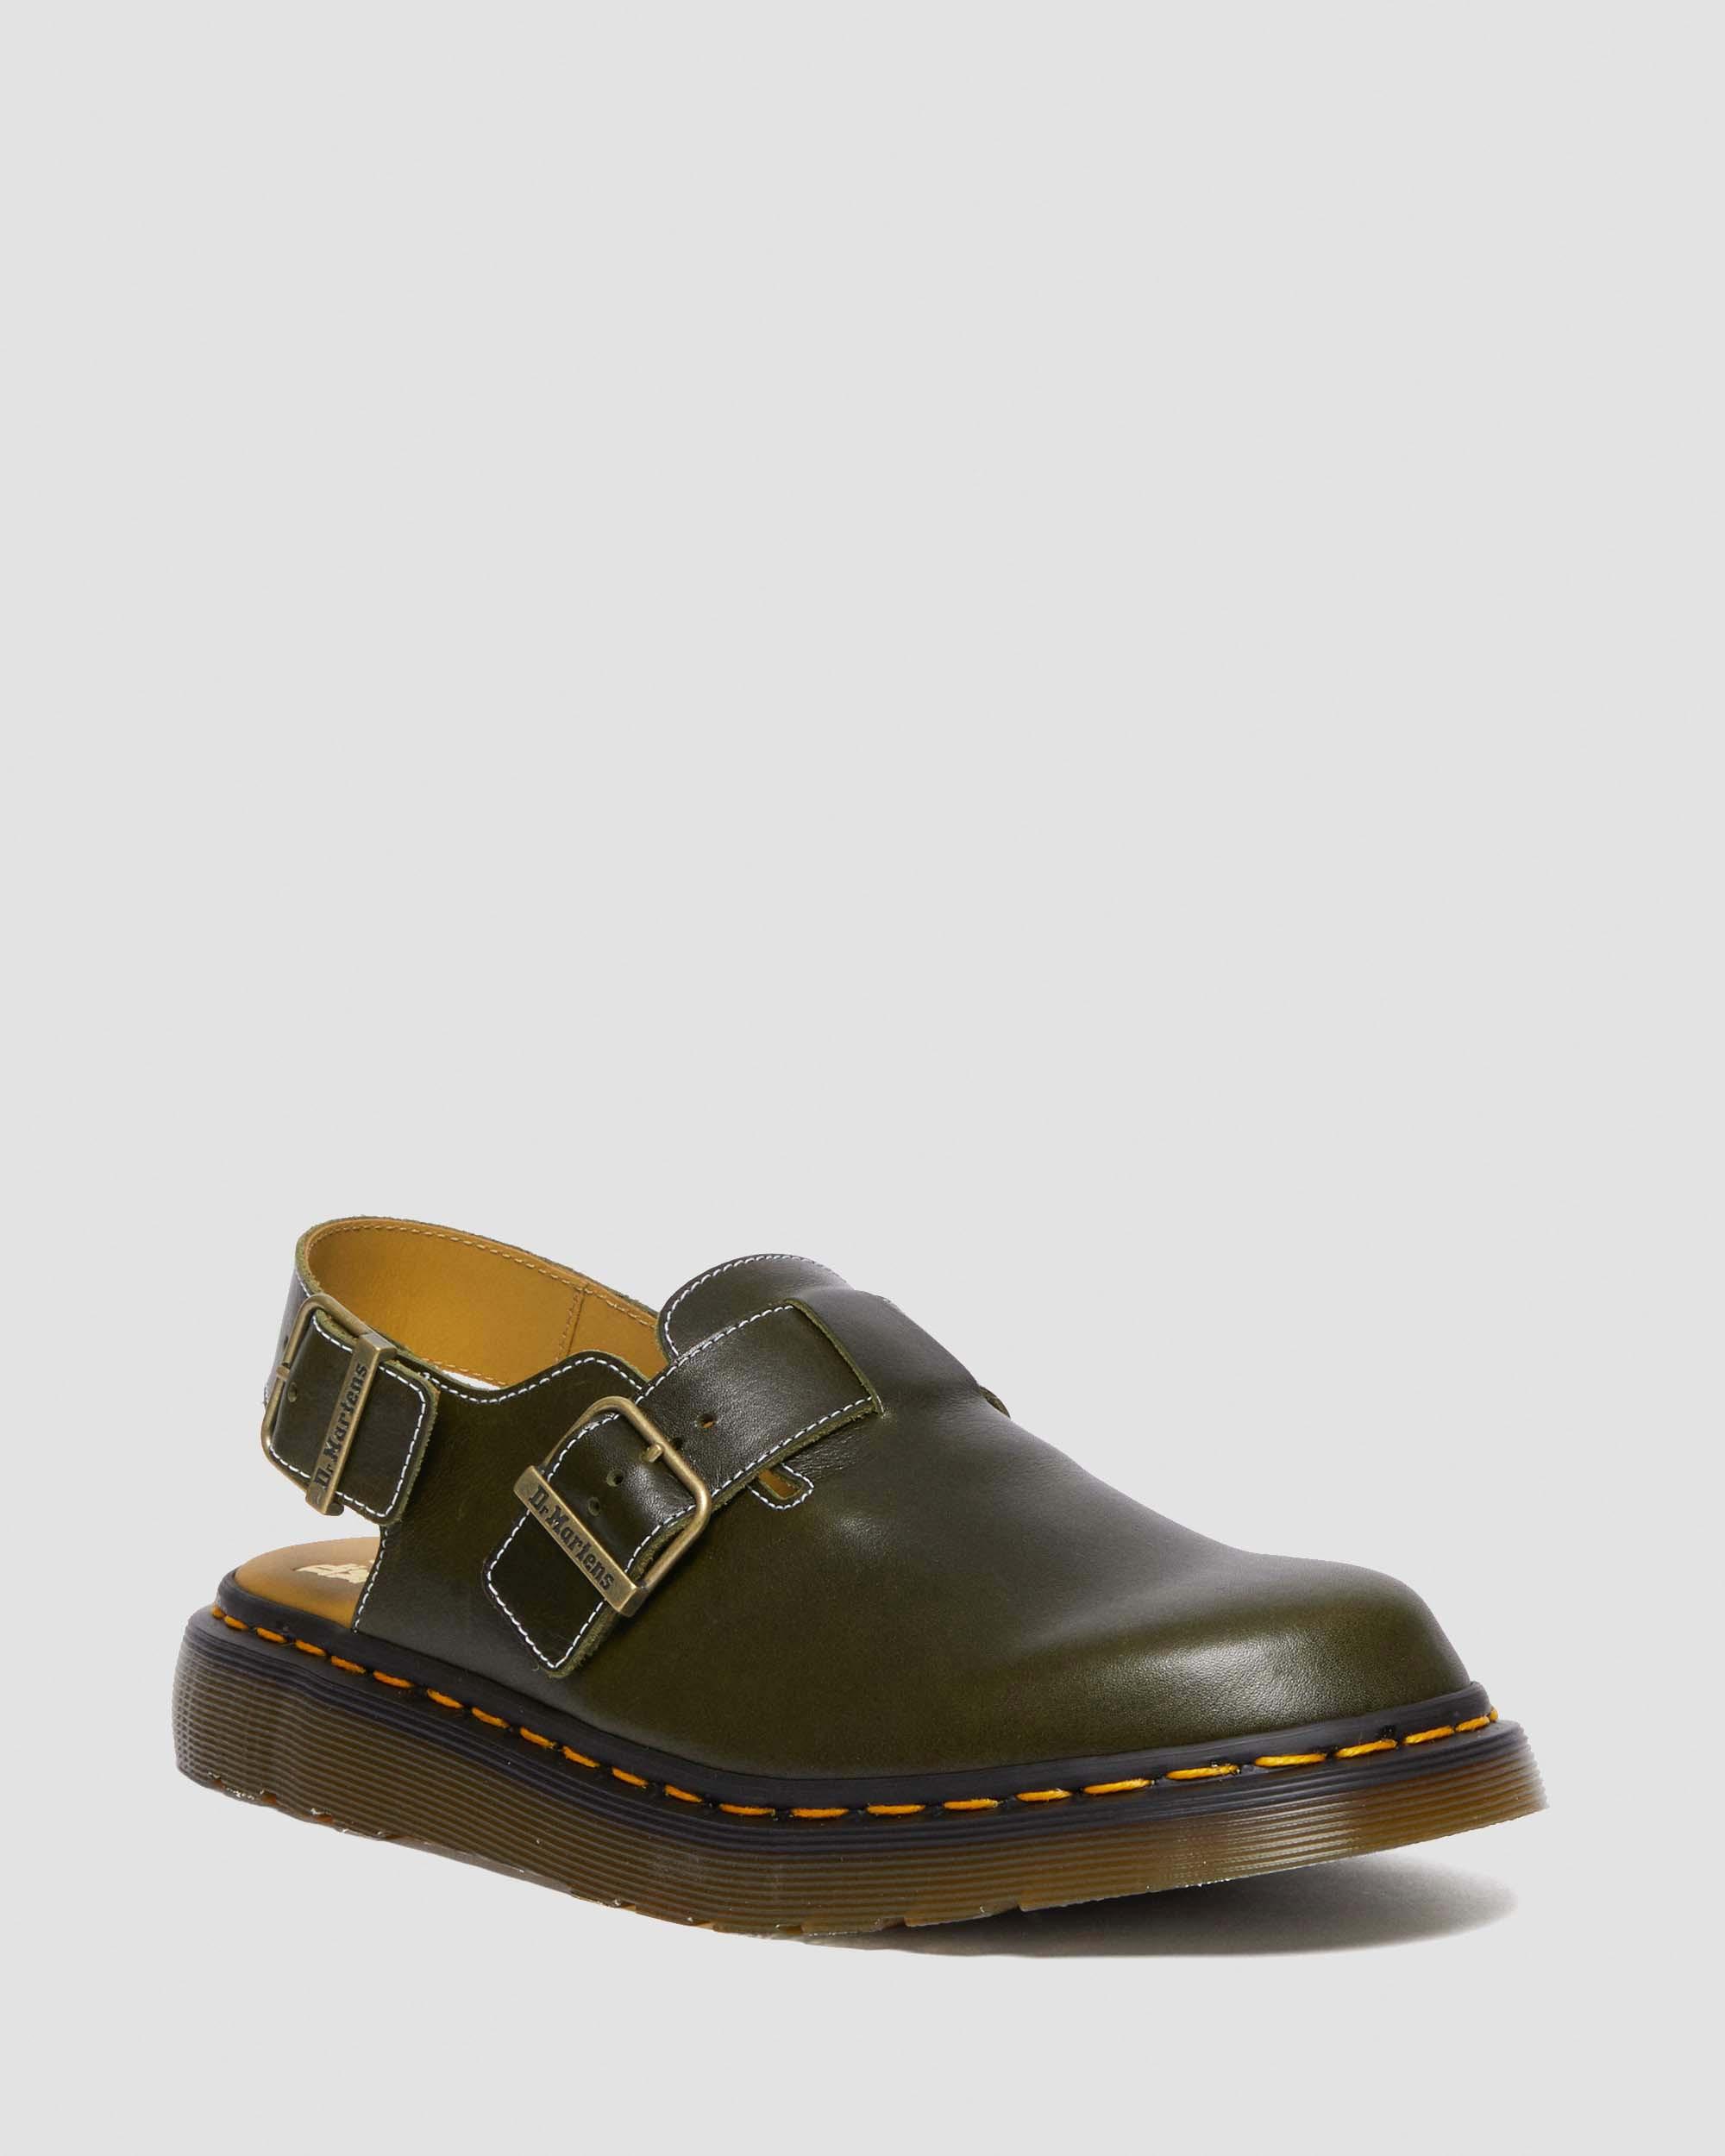 Jorge Made in England Classic Leather Slingback Mules in Dark Green ...